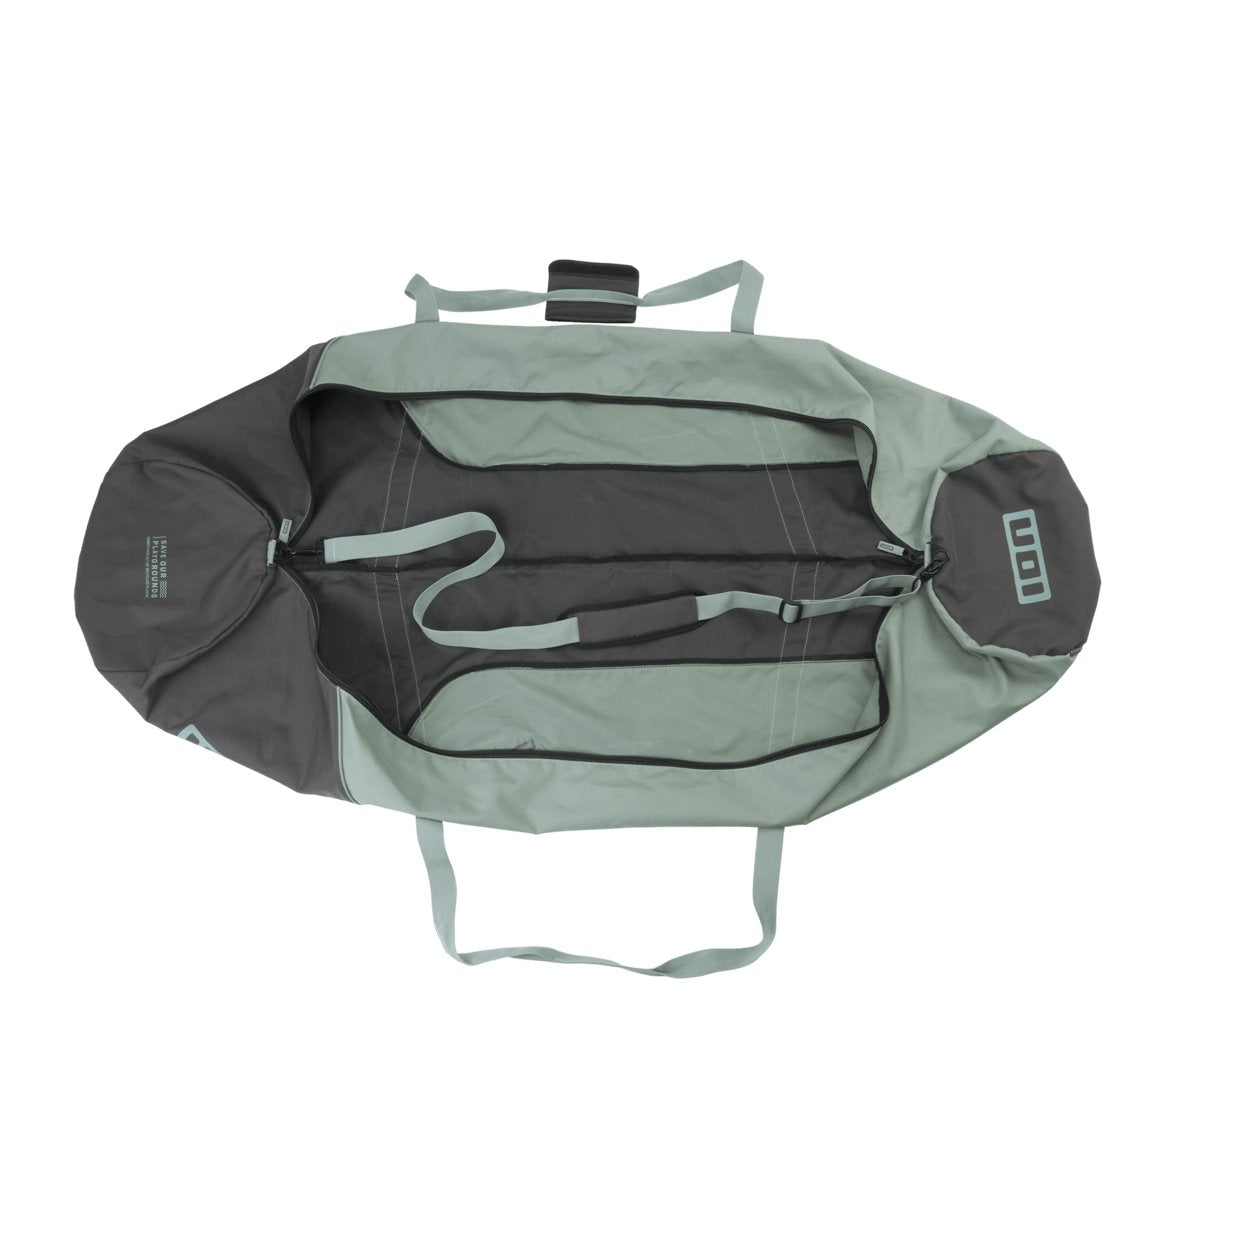 ION Wing Quiverbag Core 2023 - Worthing Watersports - 9010583126395 - Bags - ION Water